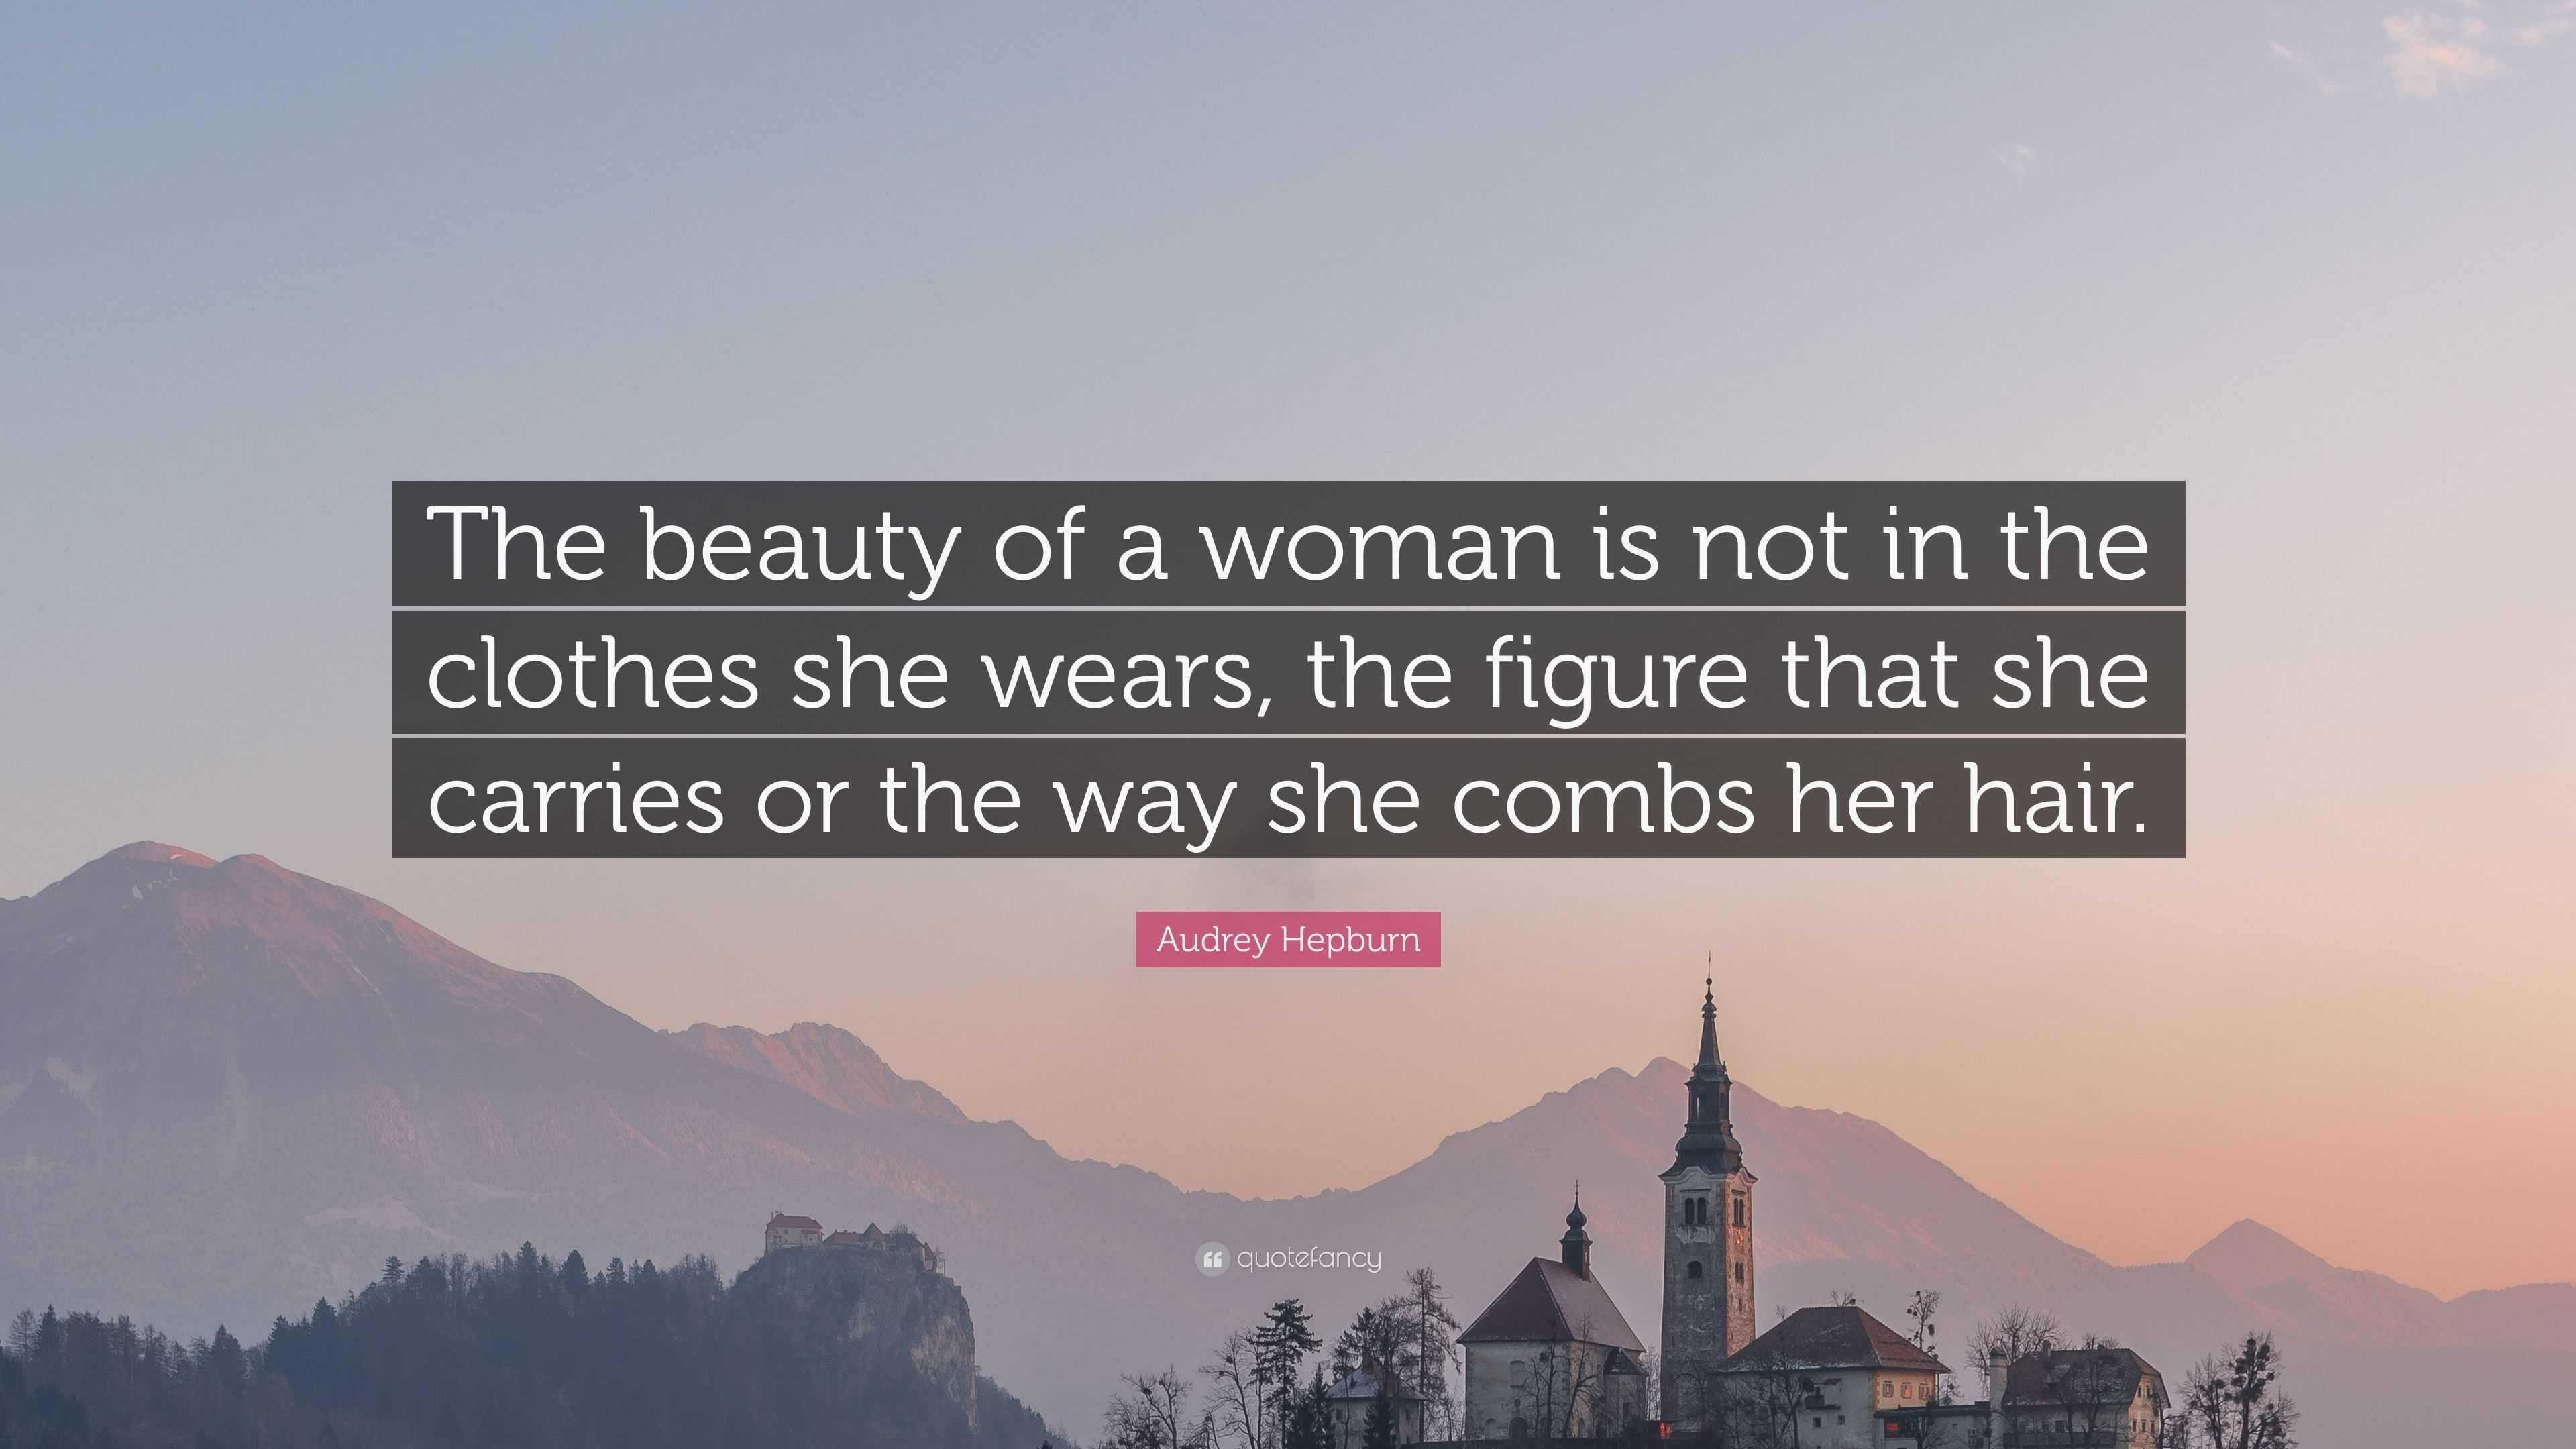 Audrey Hepburn Quote: “The beauty of a woman is not in the clothes she ...